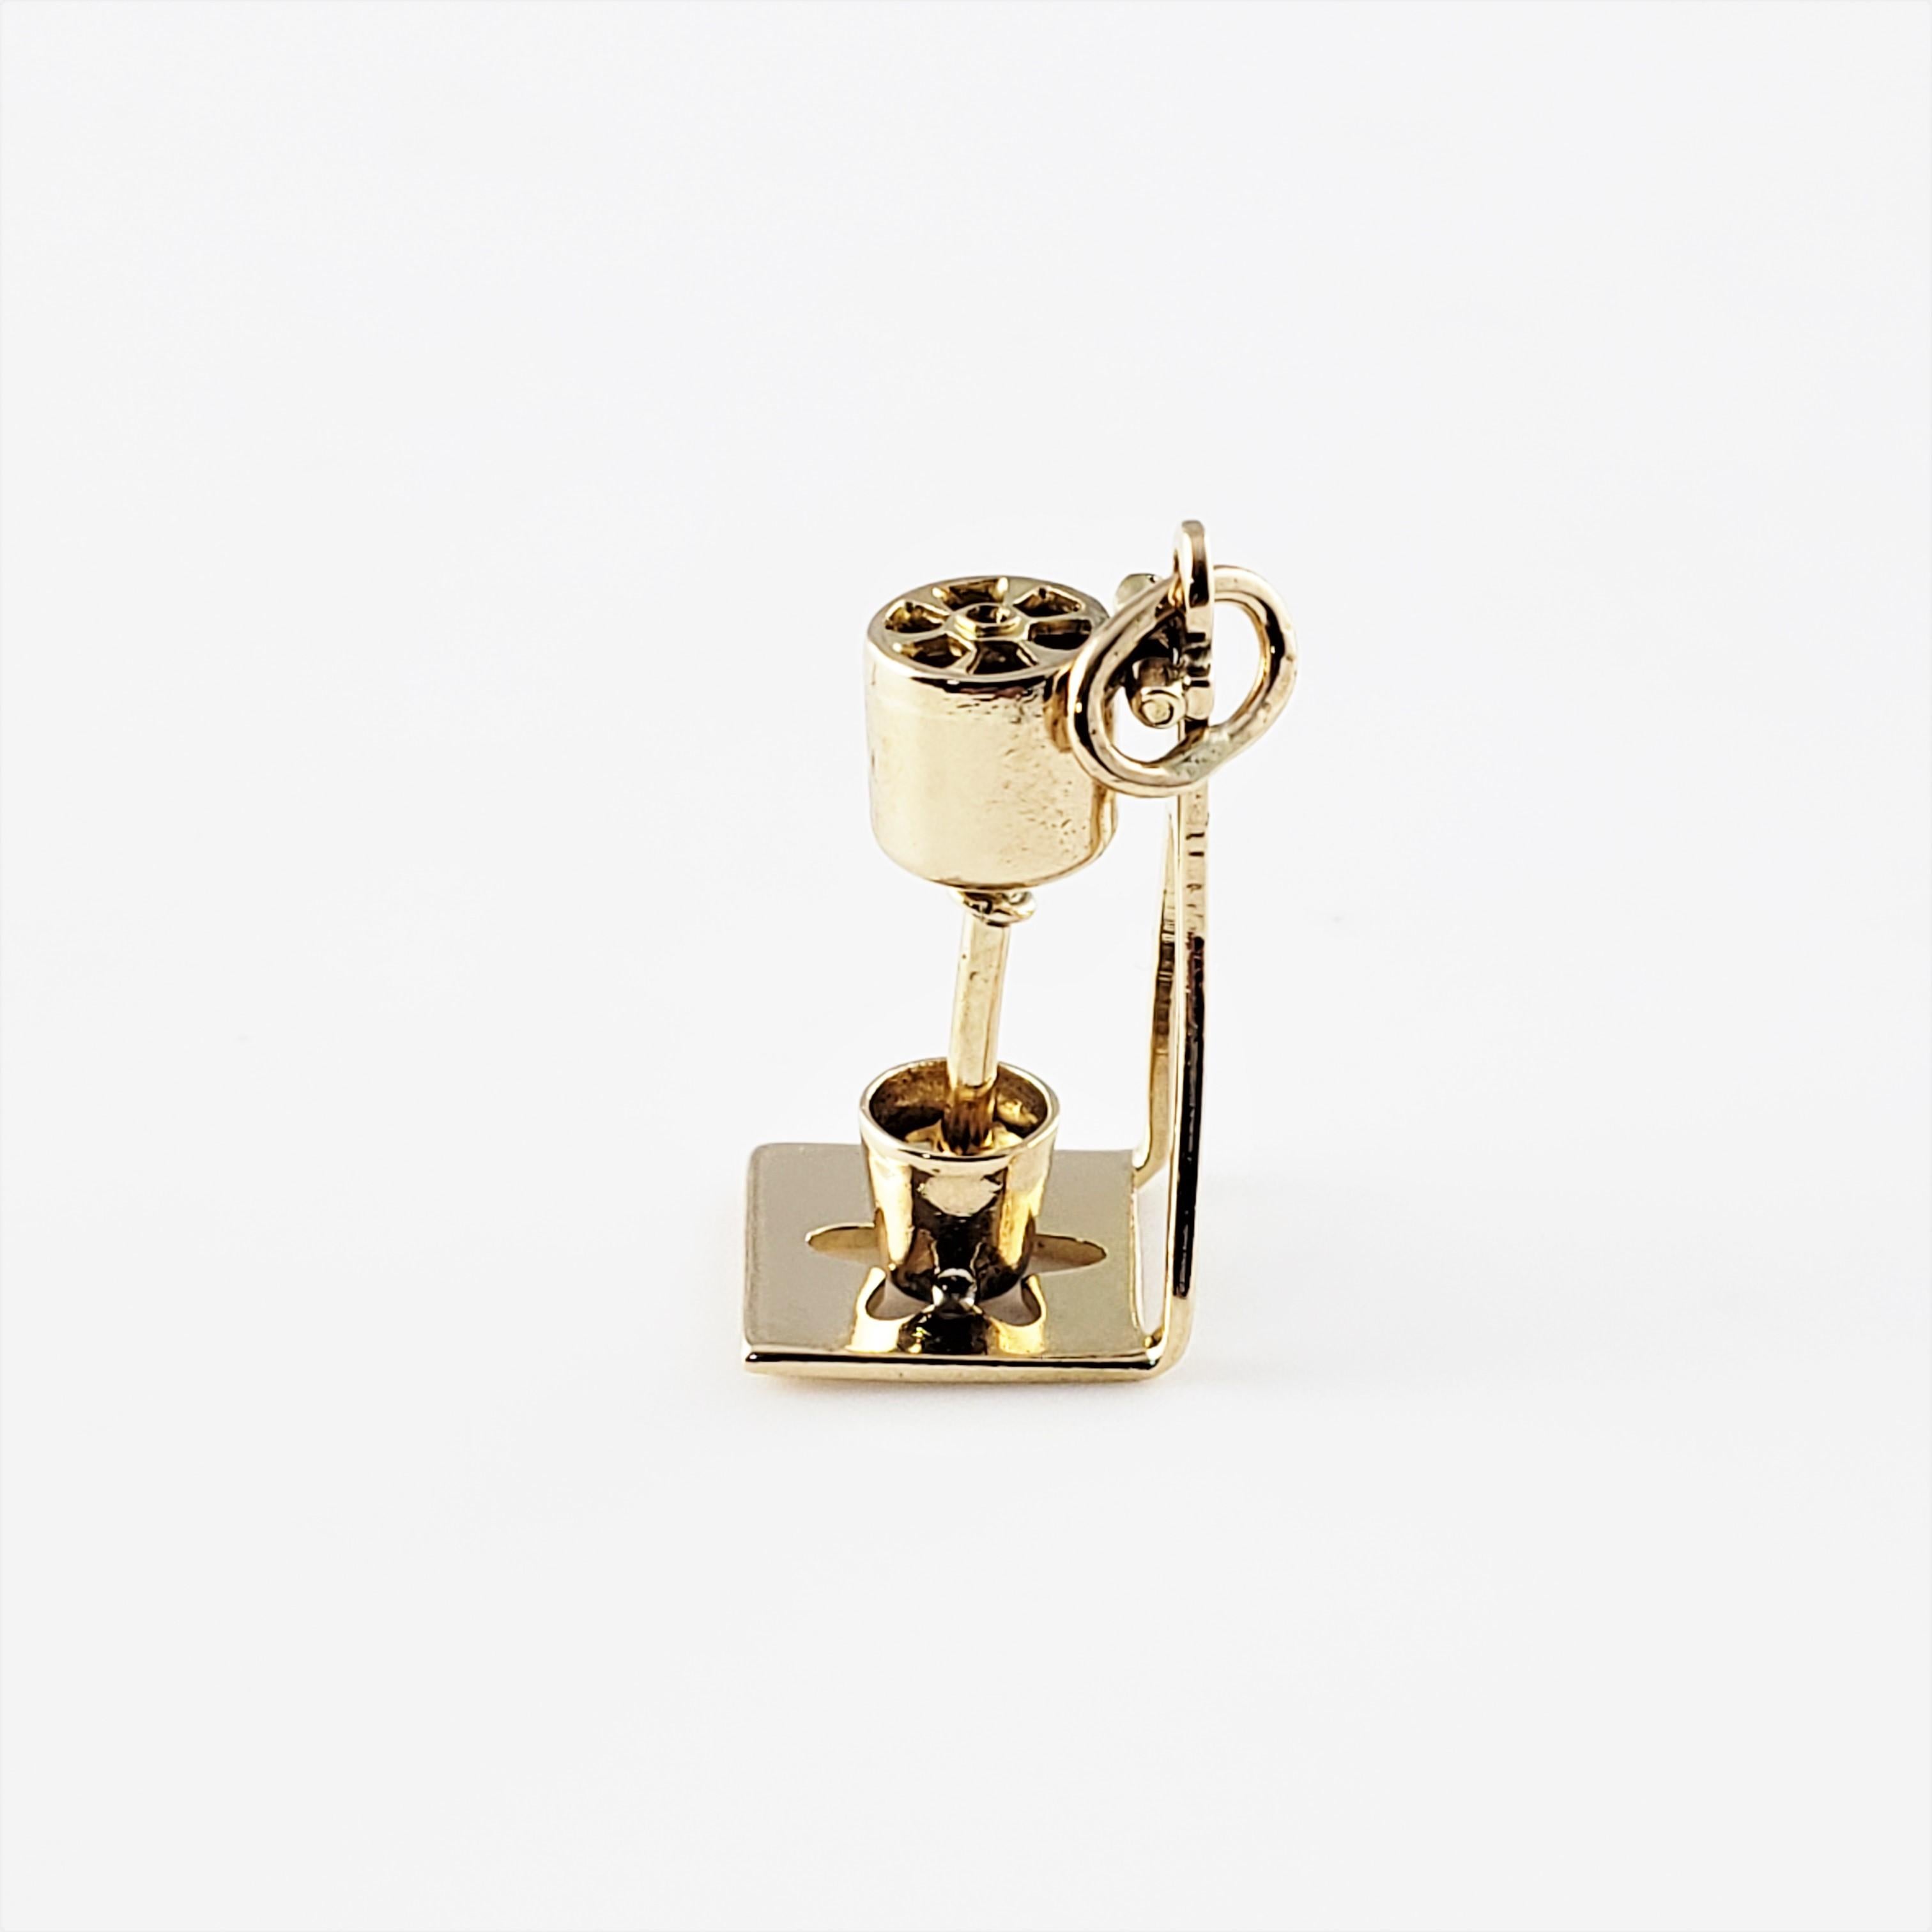 Vintage 14 Karat Yellow Gold Mixer Charm-

This lovely 3D charm features a miniature mixer meticulously detailed in 14K yellow gold.

Size: 12 mm x 8 mm (actual charm)

Weight: 0.8 dwt. / 1.3 gr.

Stamped: 14K